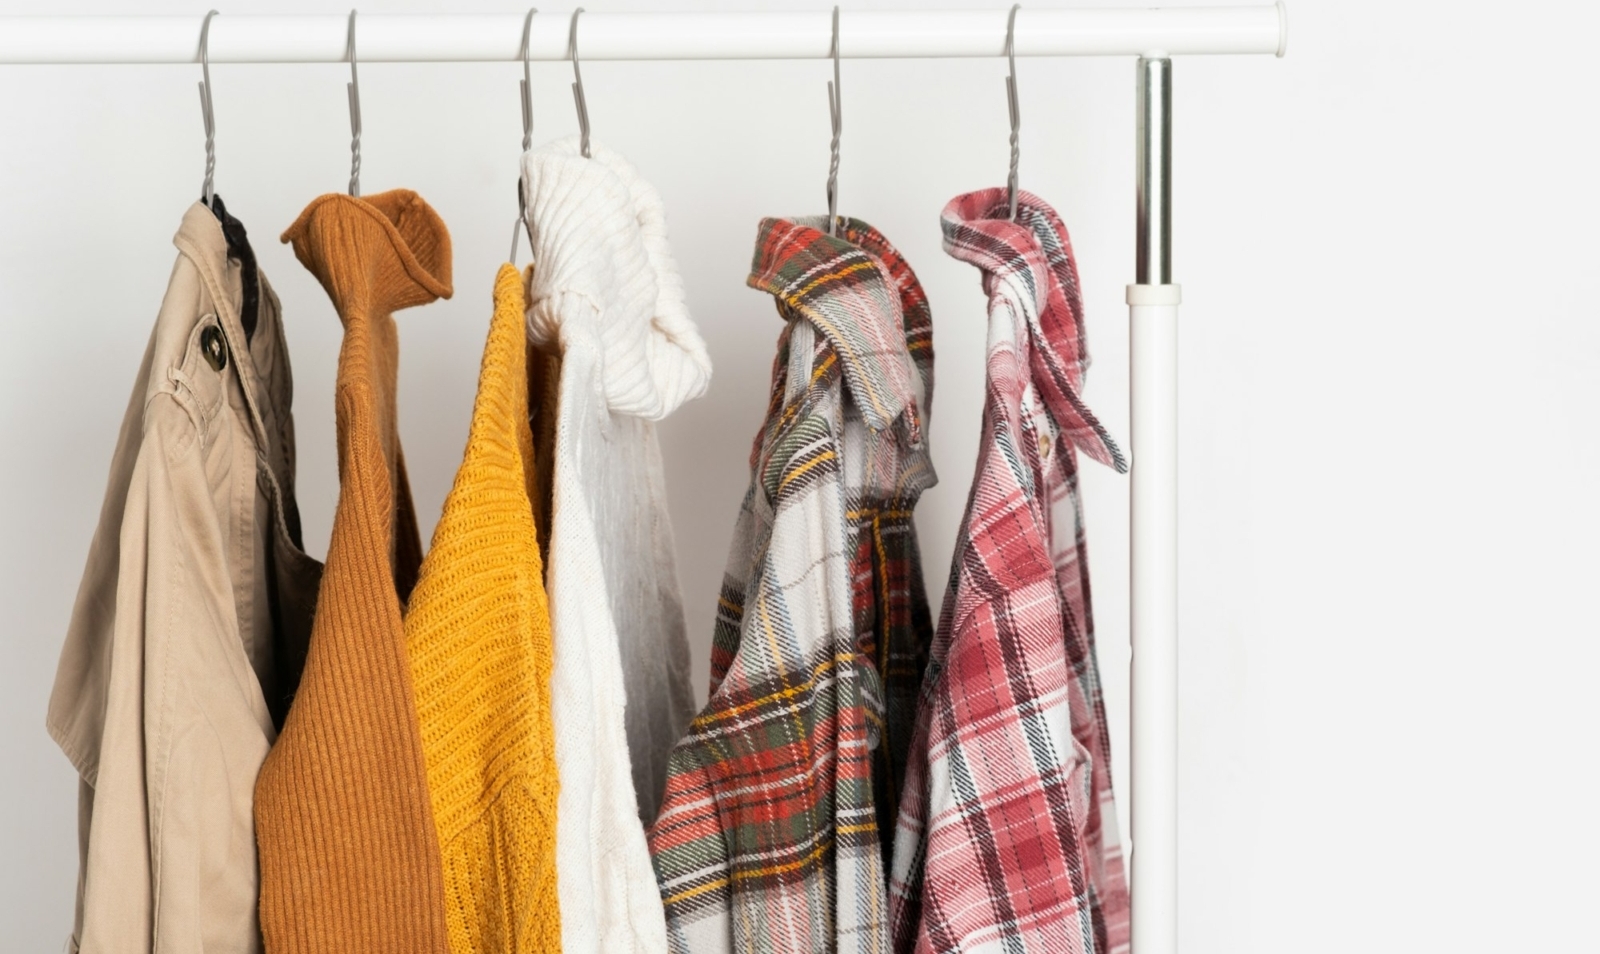 Autumn vintage clothing hangs on hangers on the rack. Beige trench coat, sweaters, plaid shirts